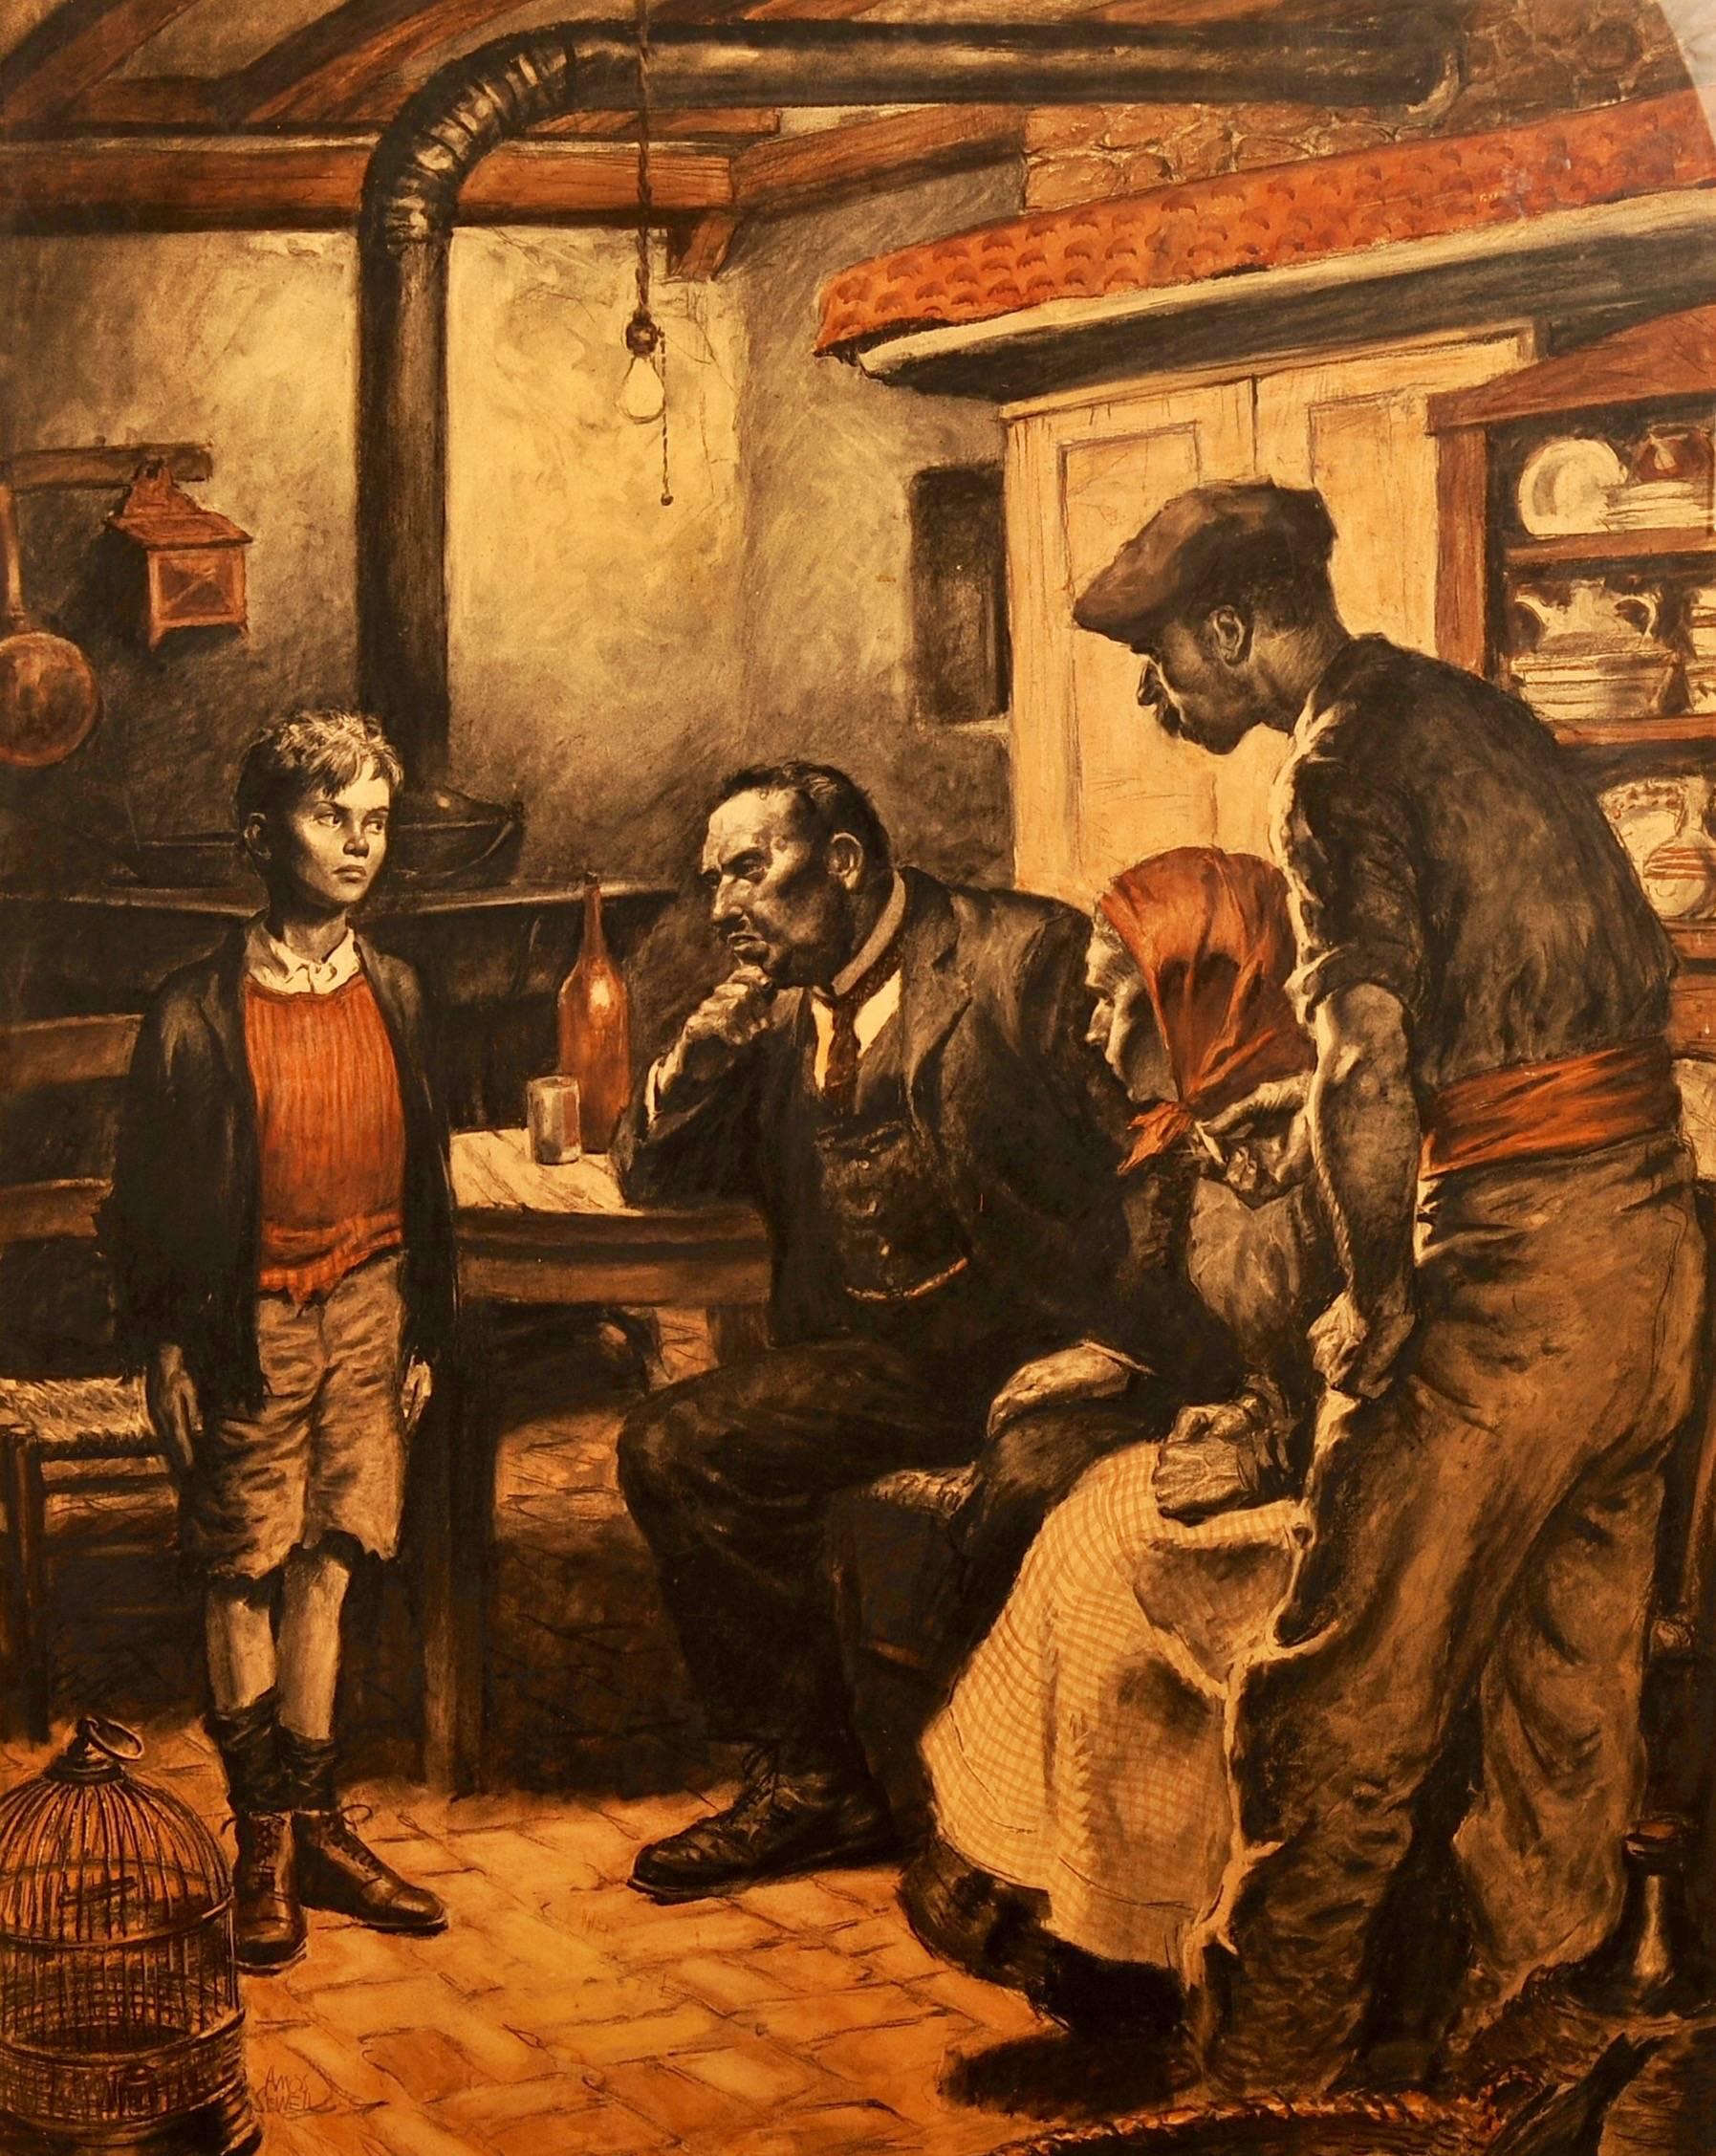 Three Men Questioning Boy - Mixed Media Art by Amos Sewell